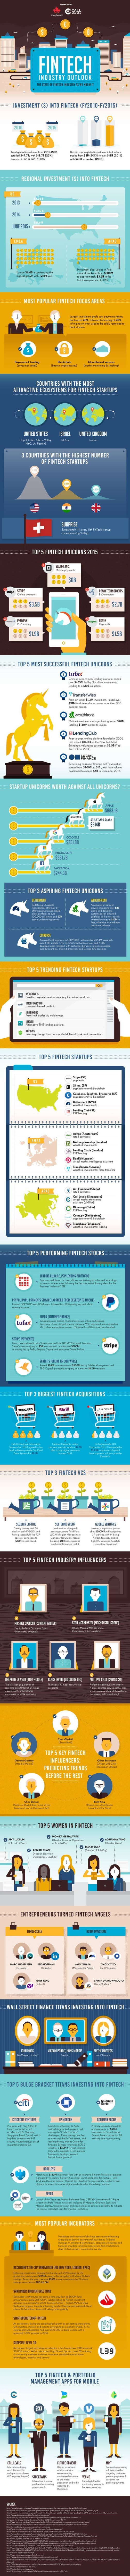 The State of Fintech Industry as We Know It [Infographic]